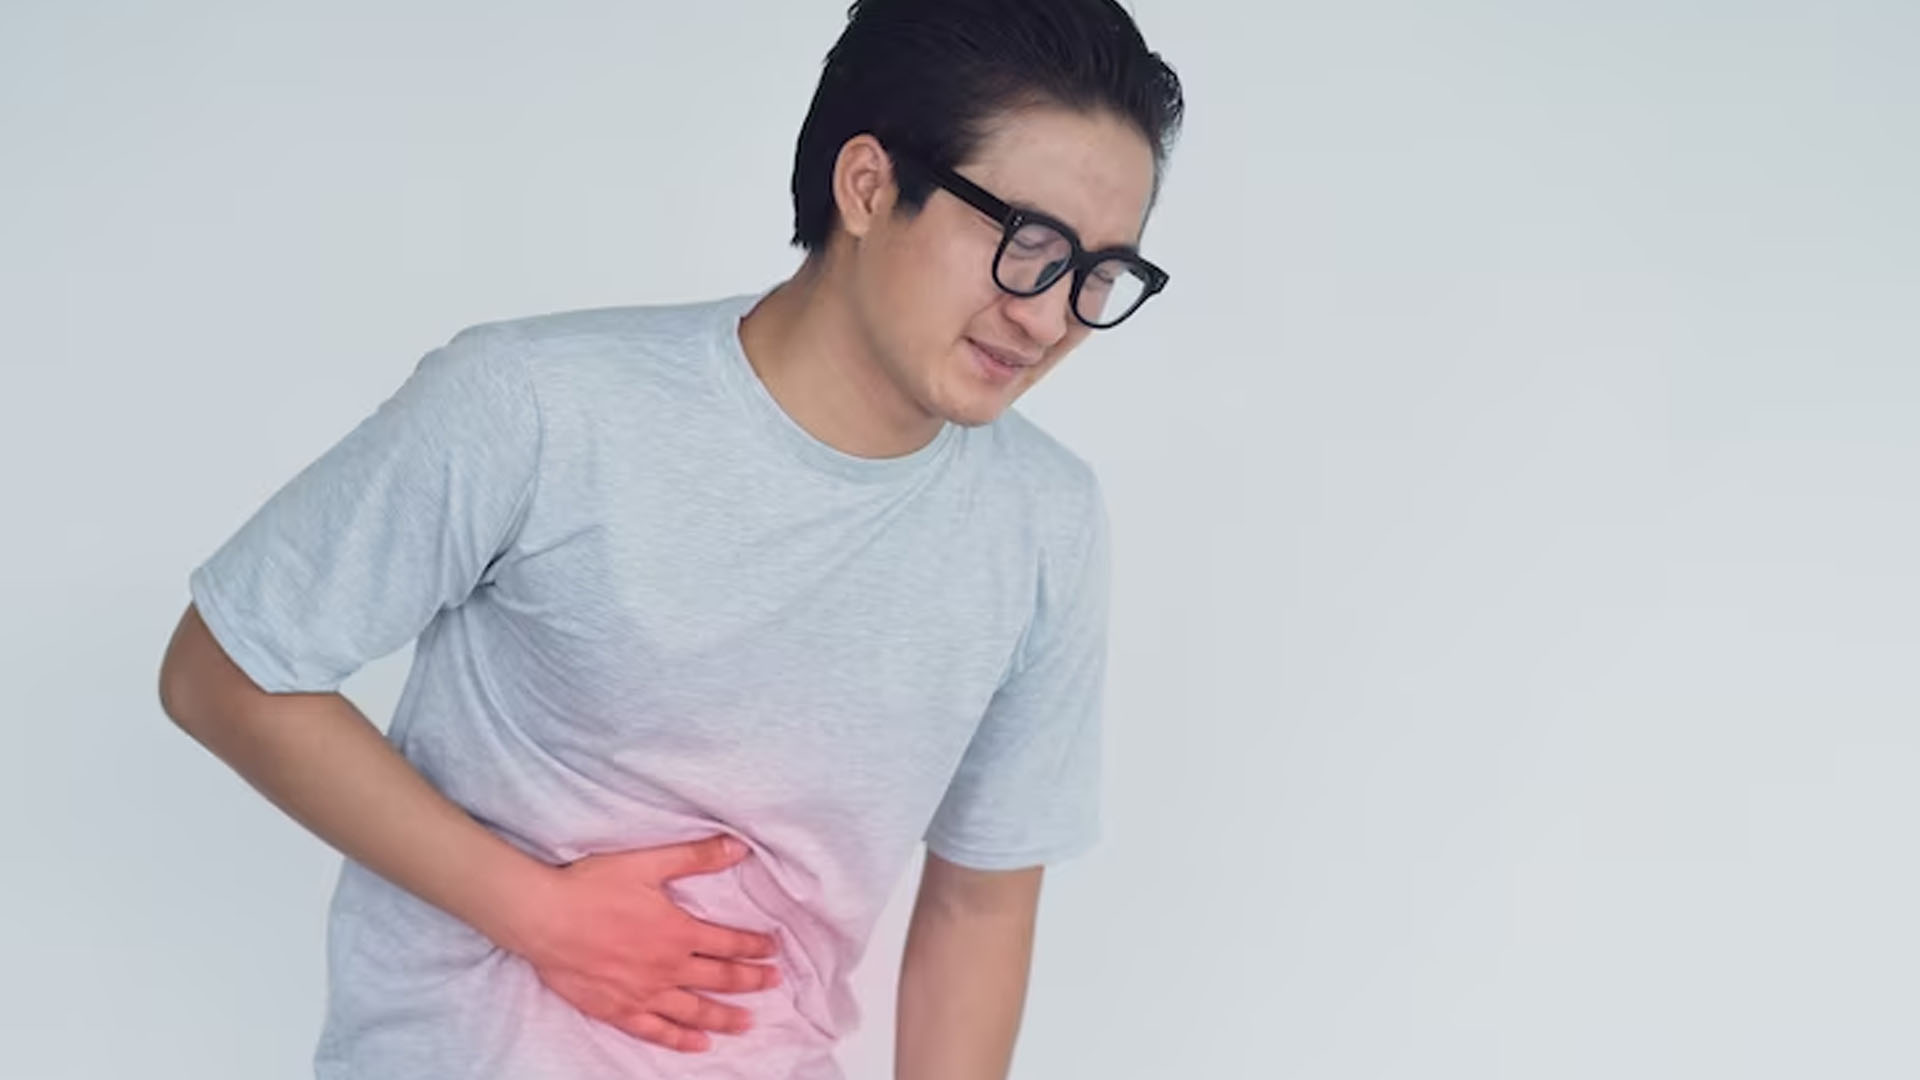 Is Stomach Pain a Symptom of Cancer?